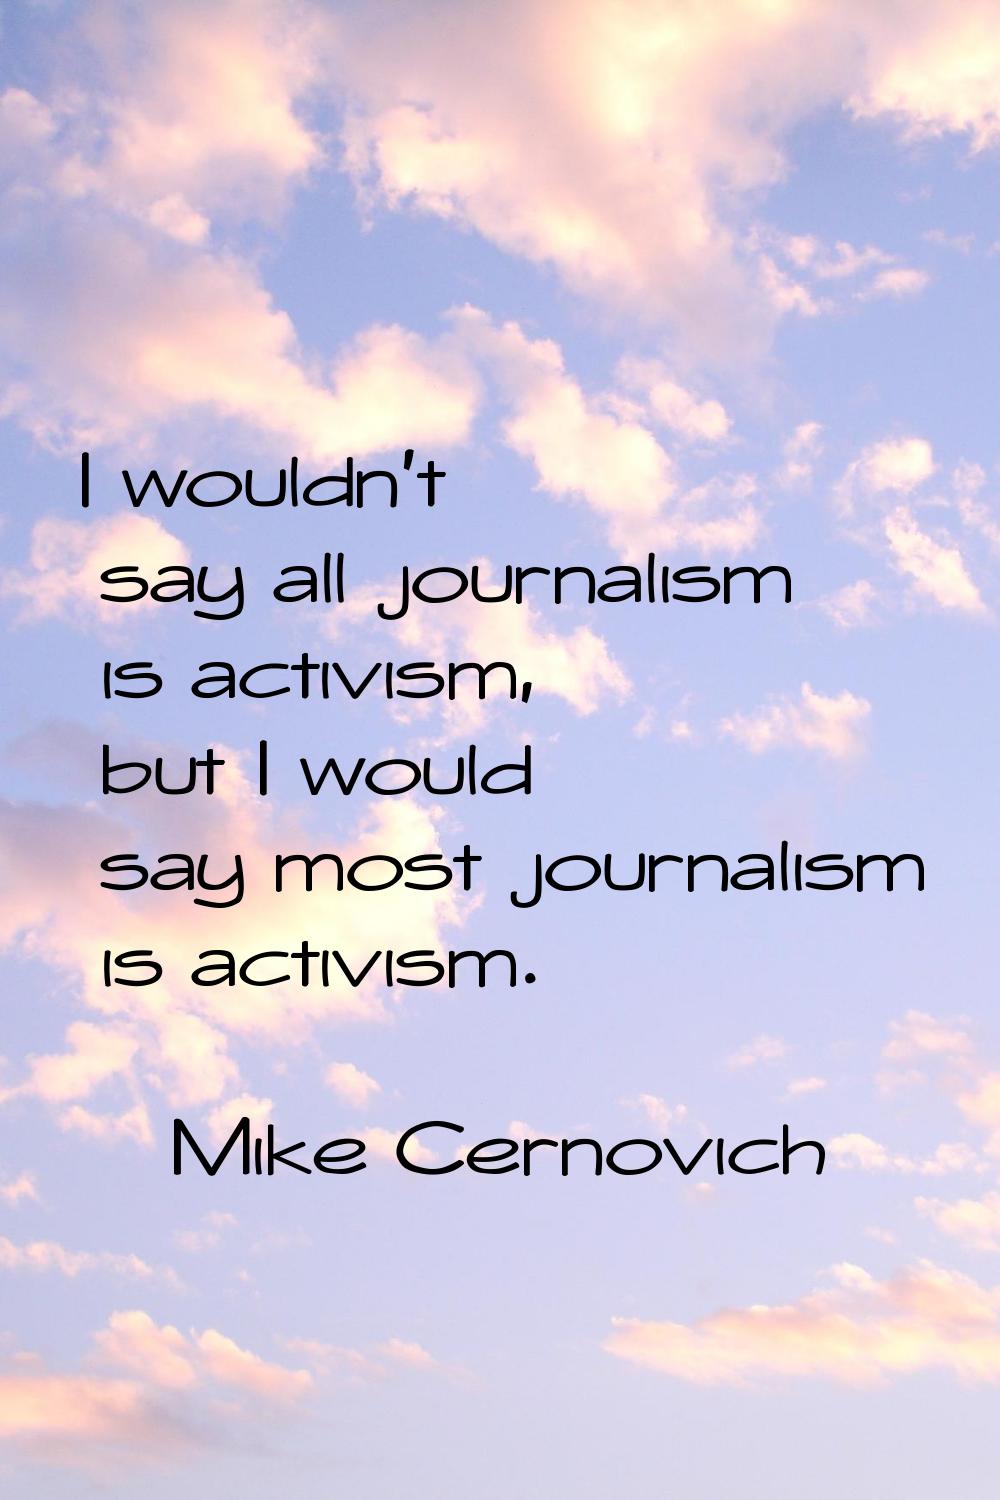 I wouldn't say all journalism is activism, but I would say most journalism is activism.